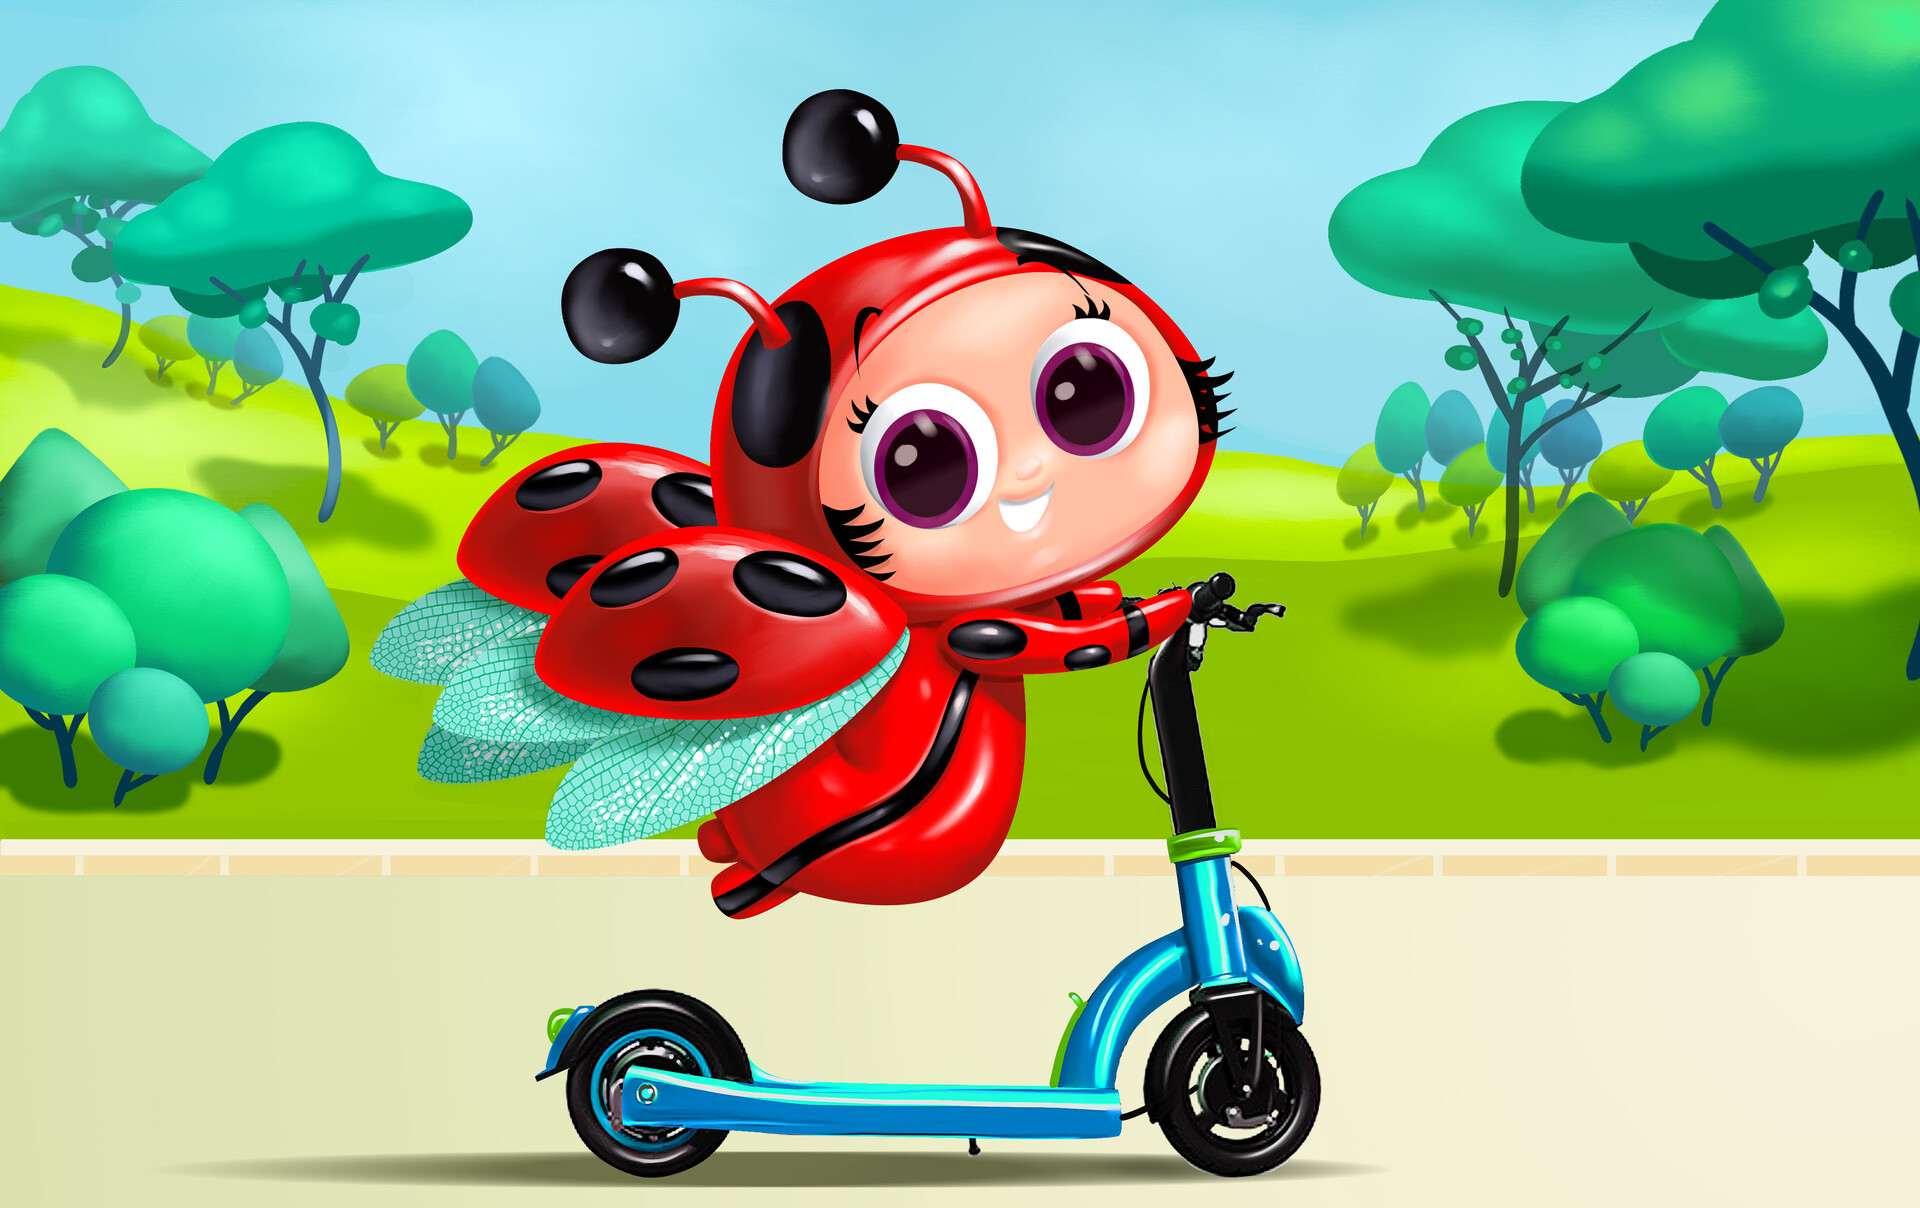 ArtStation - Cute Ladybug on her Electric scooter, Le Discot Olivier